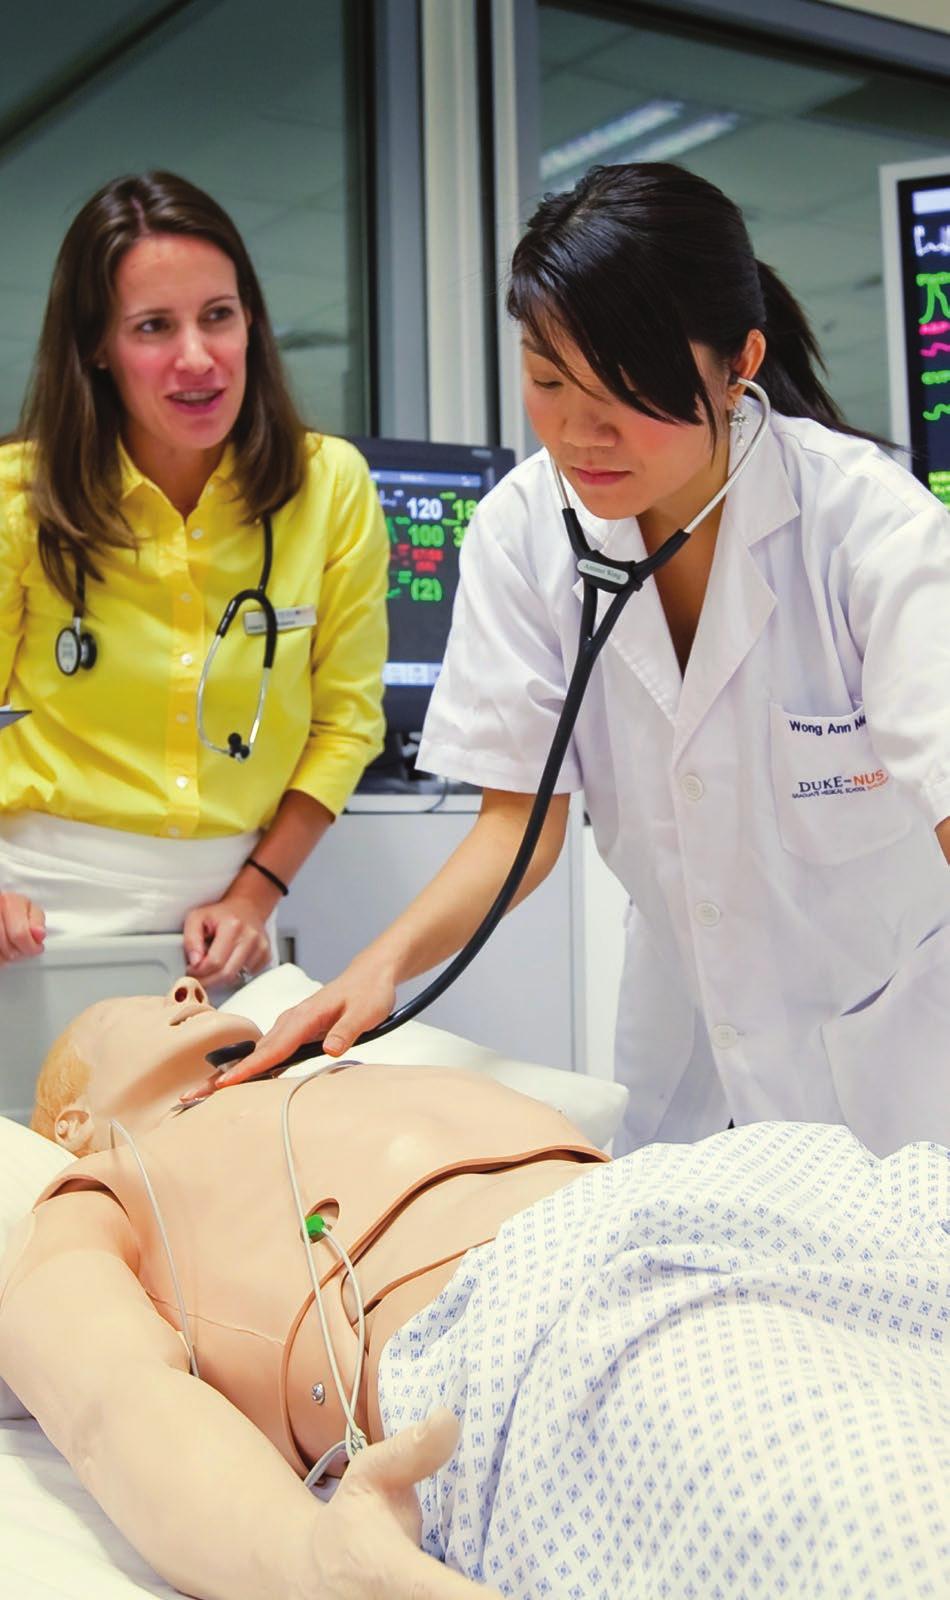 Duke-NUS MD Program DELIVERING A DYNAMIC AND RELEVANT MEDICAL CURRICULUM The Duke-NUS MD program is distinctively designed to prepare physician leaders in medical research, education, and patient